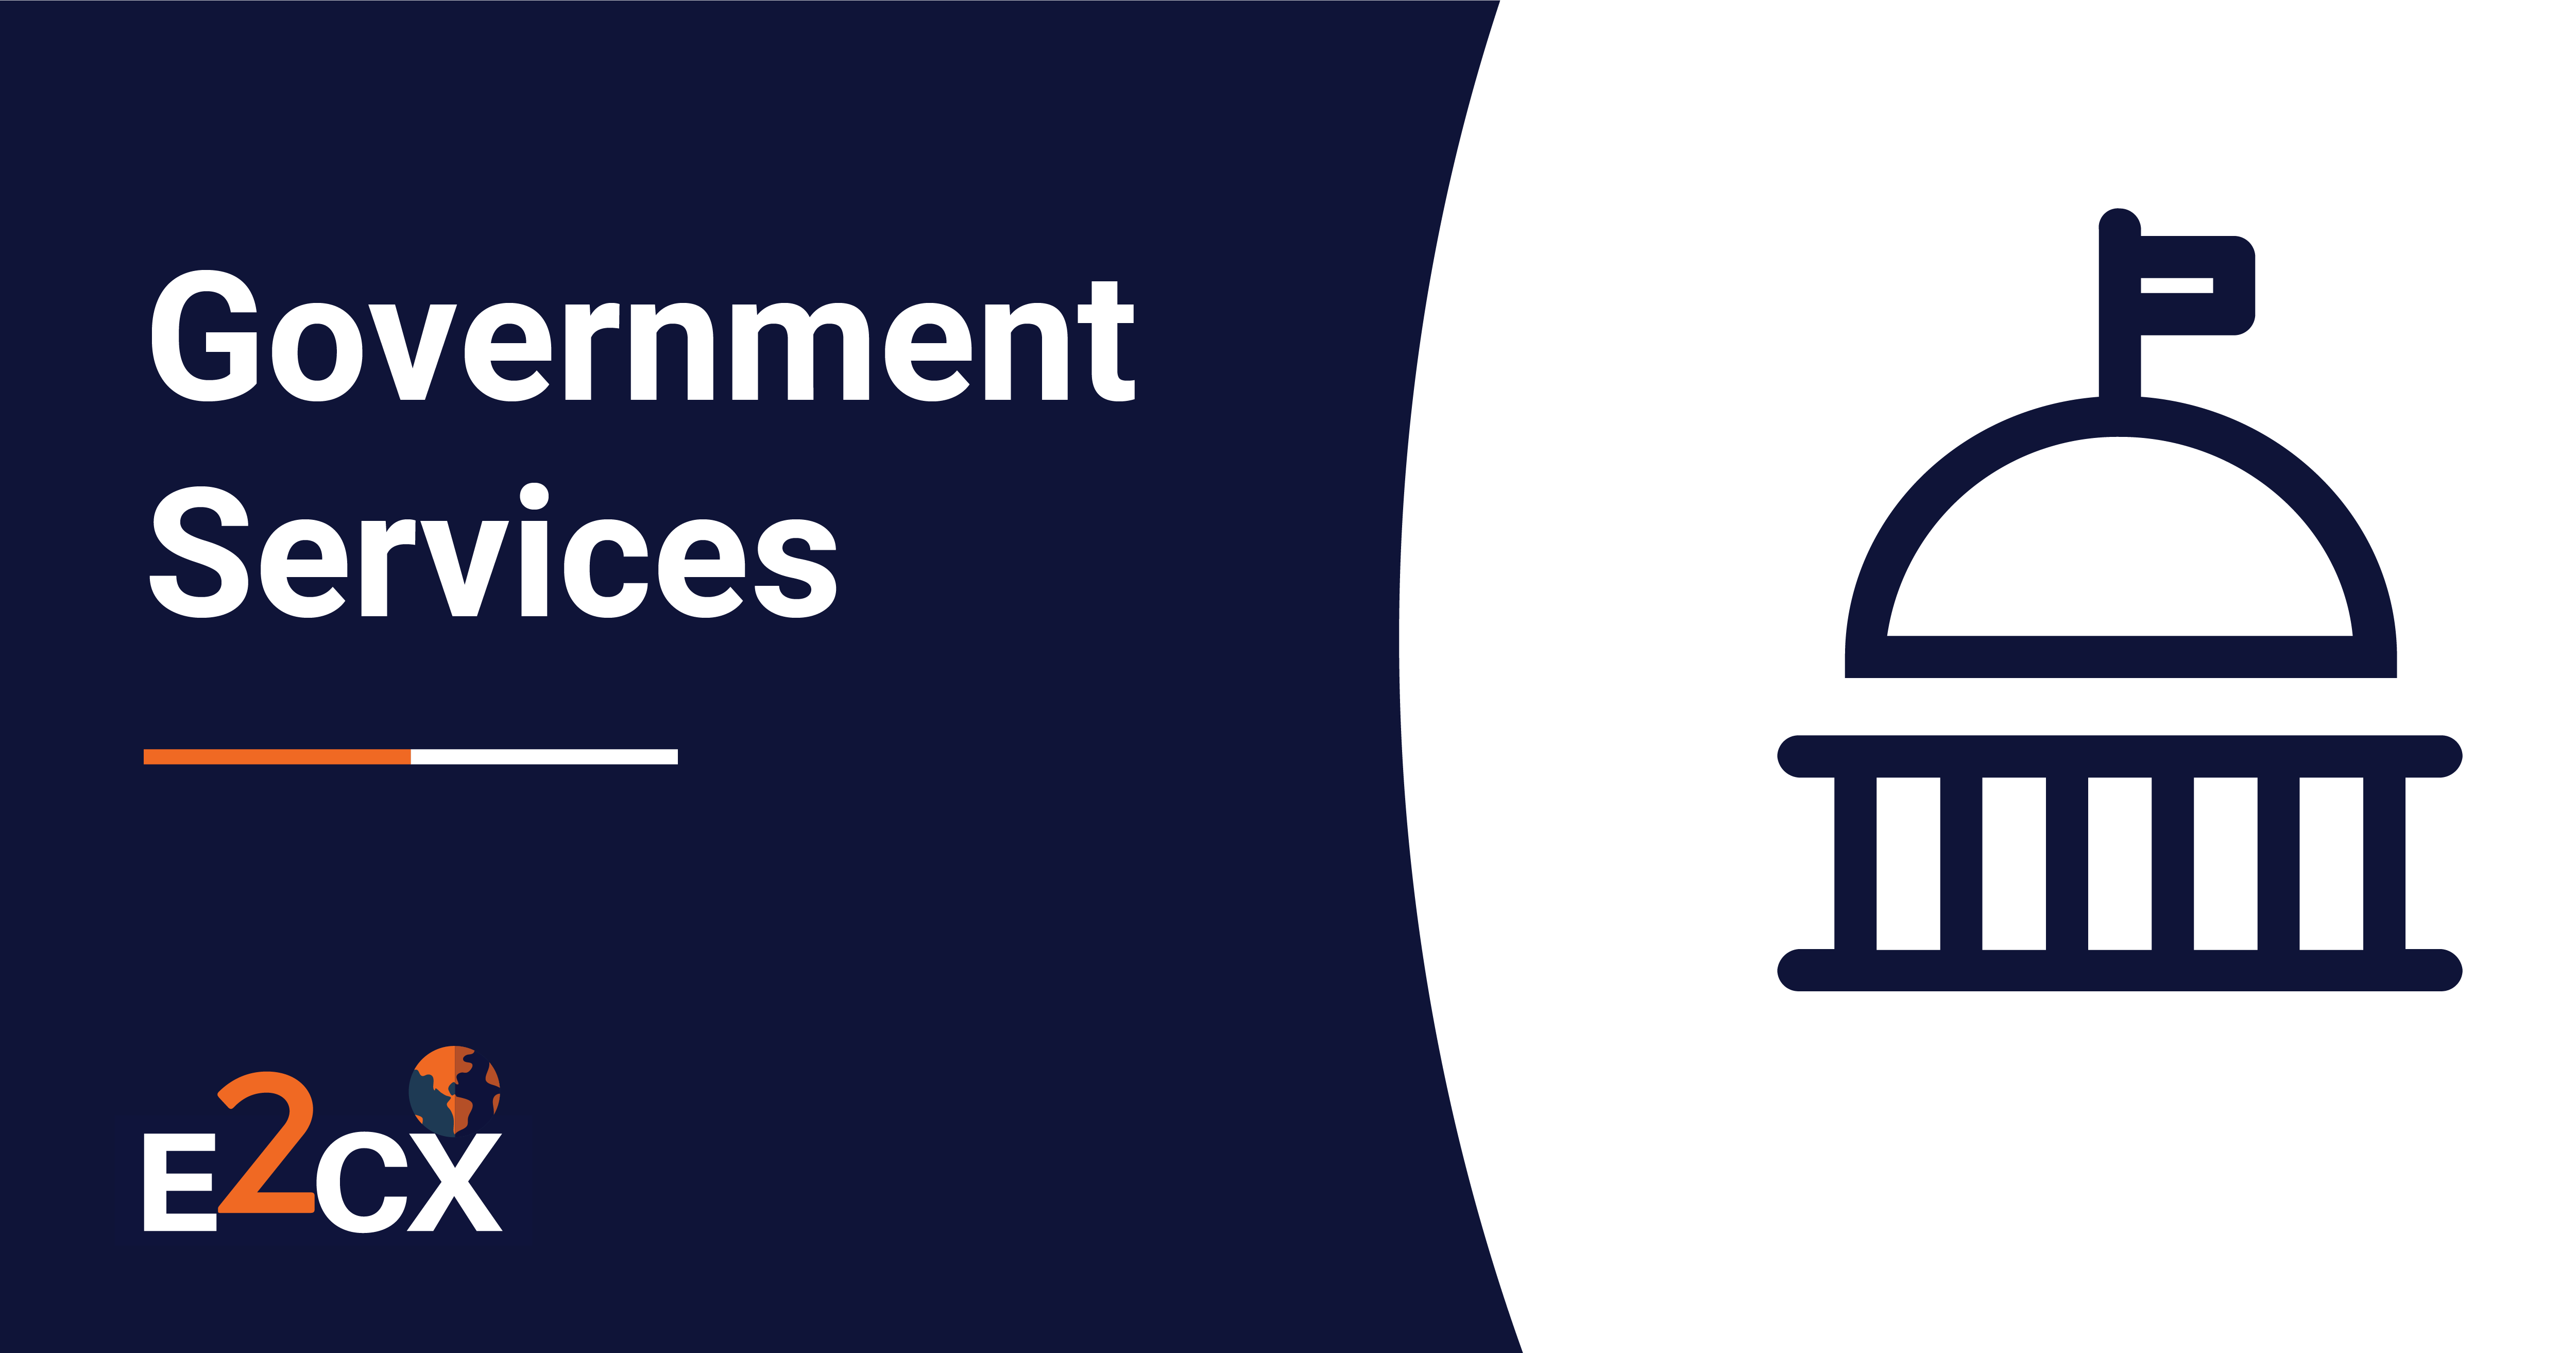 Government Services